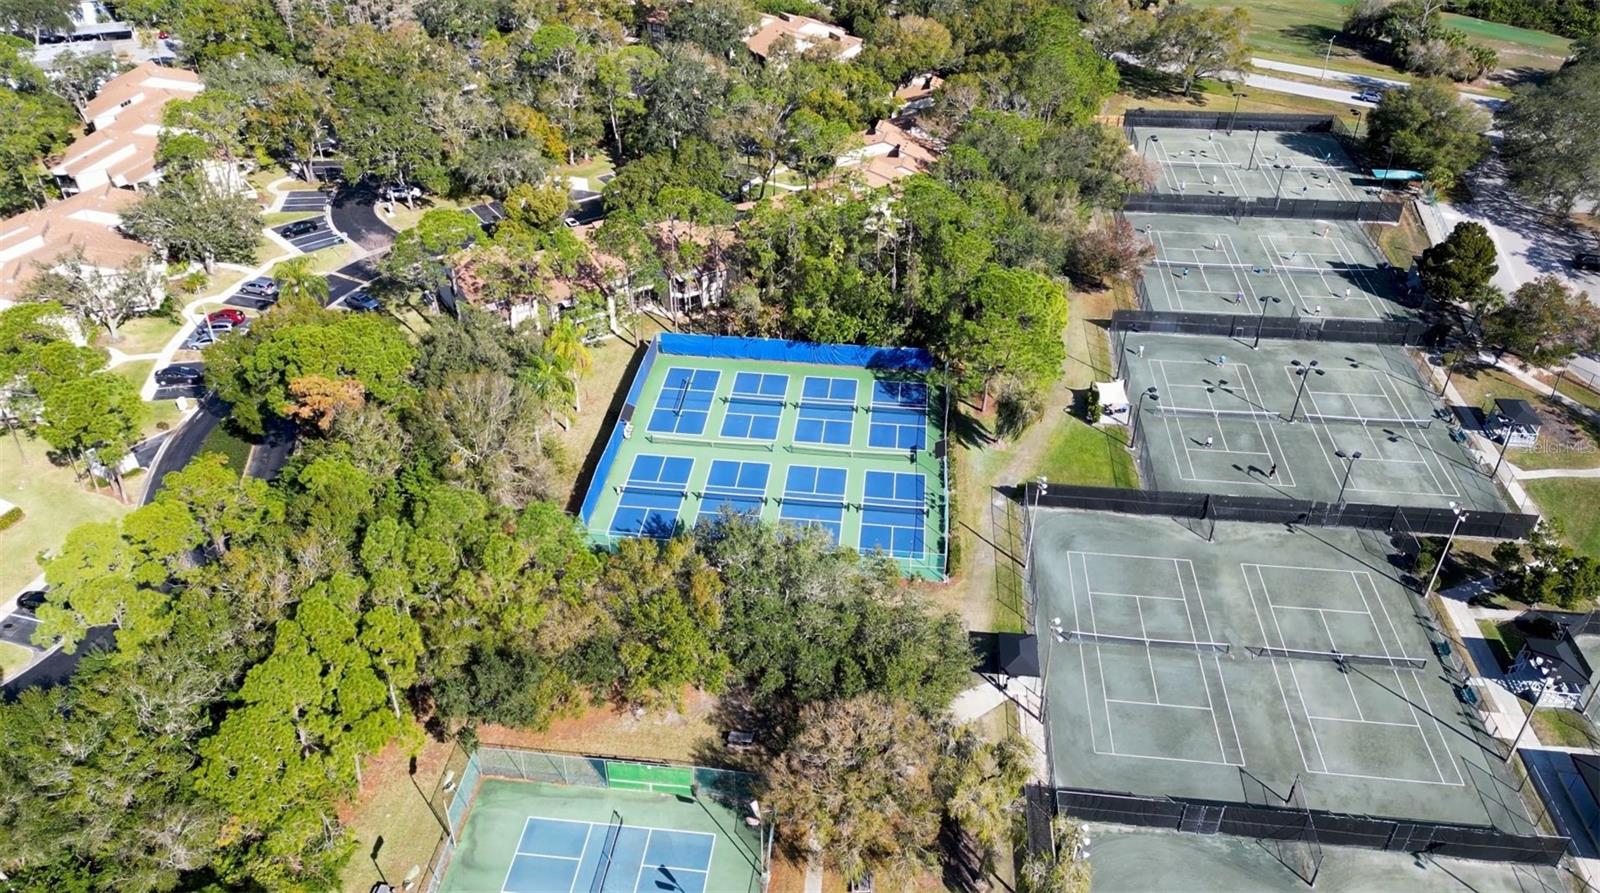 Tennis, Pkckleball, and sparkling pool available with Ardea Country Club membership.